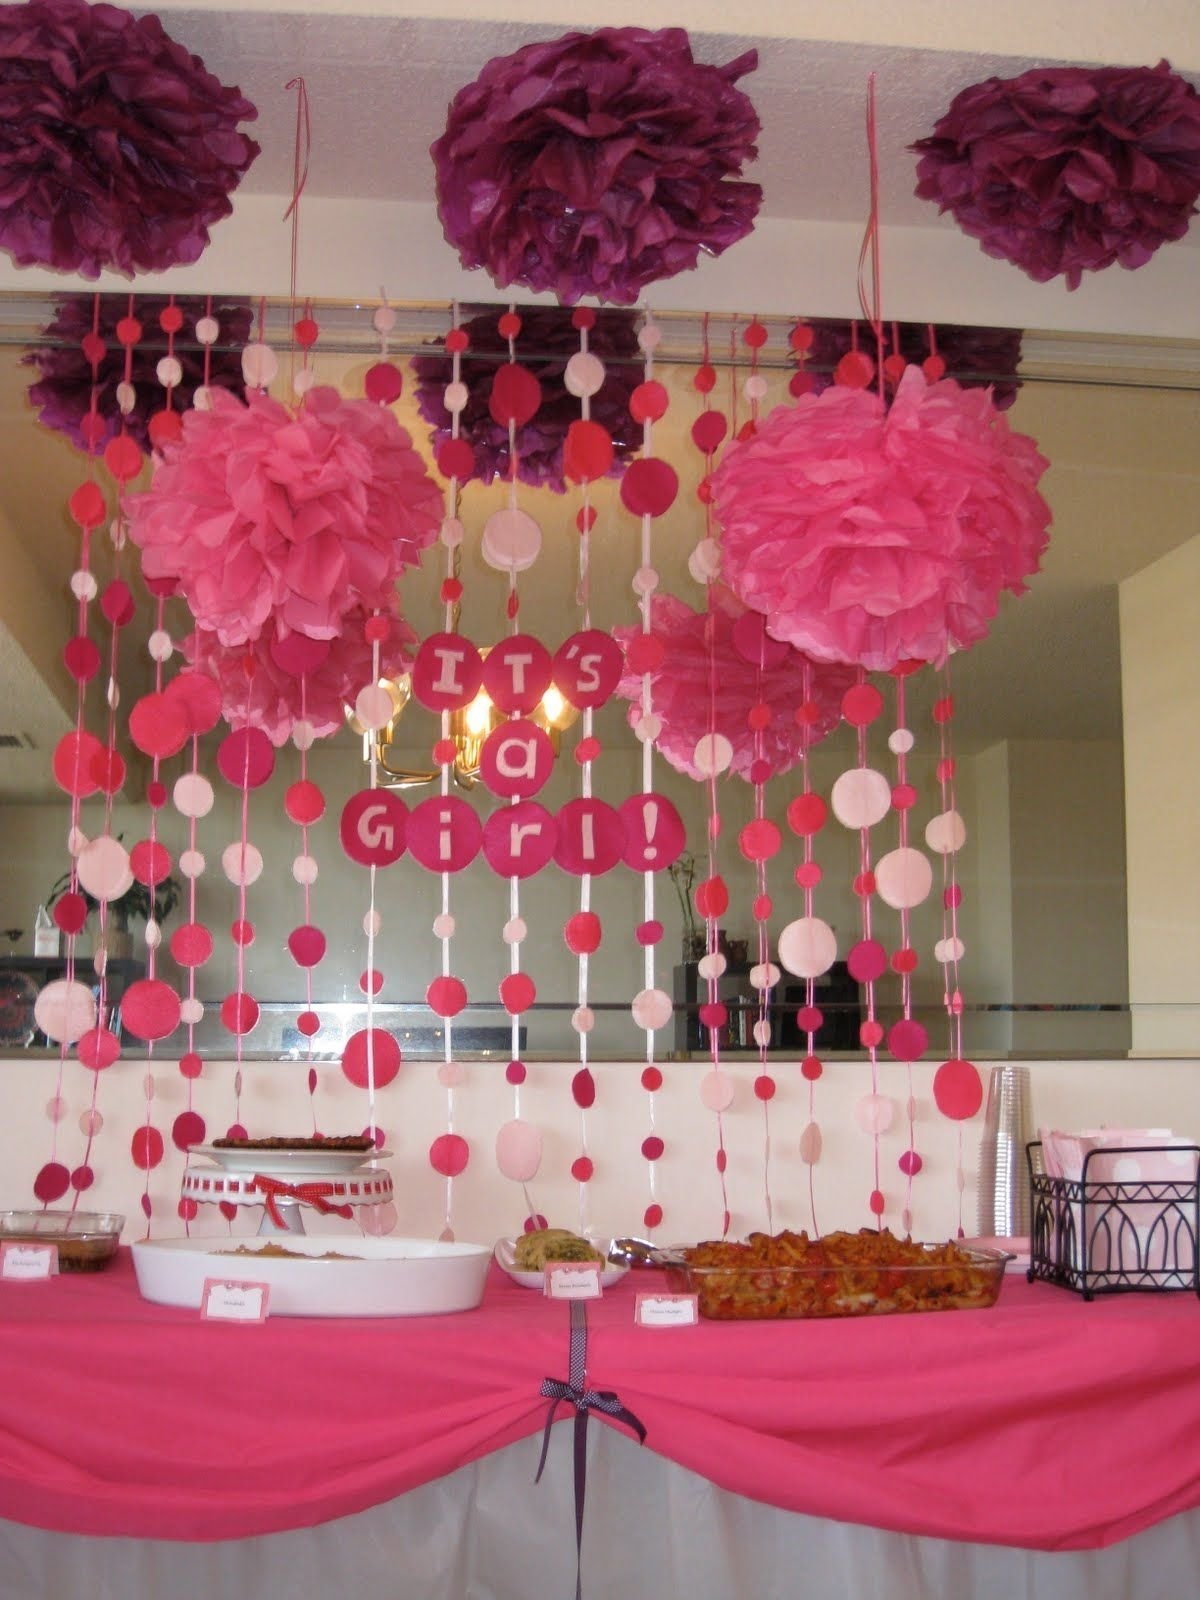 10 Ideal Baby Girl Shower Theme Ideas baby shower centerpiece ideas baby girl shower ideas wedding 4 2022